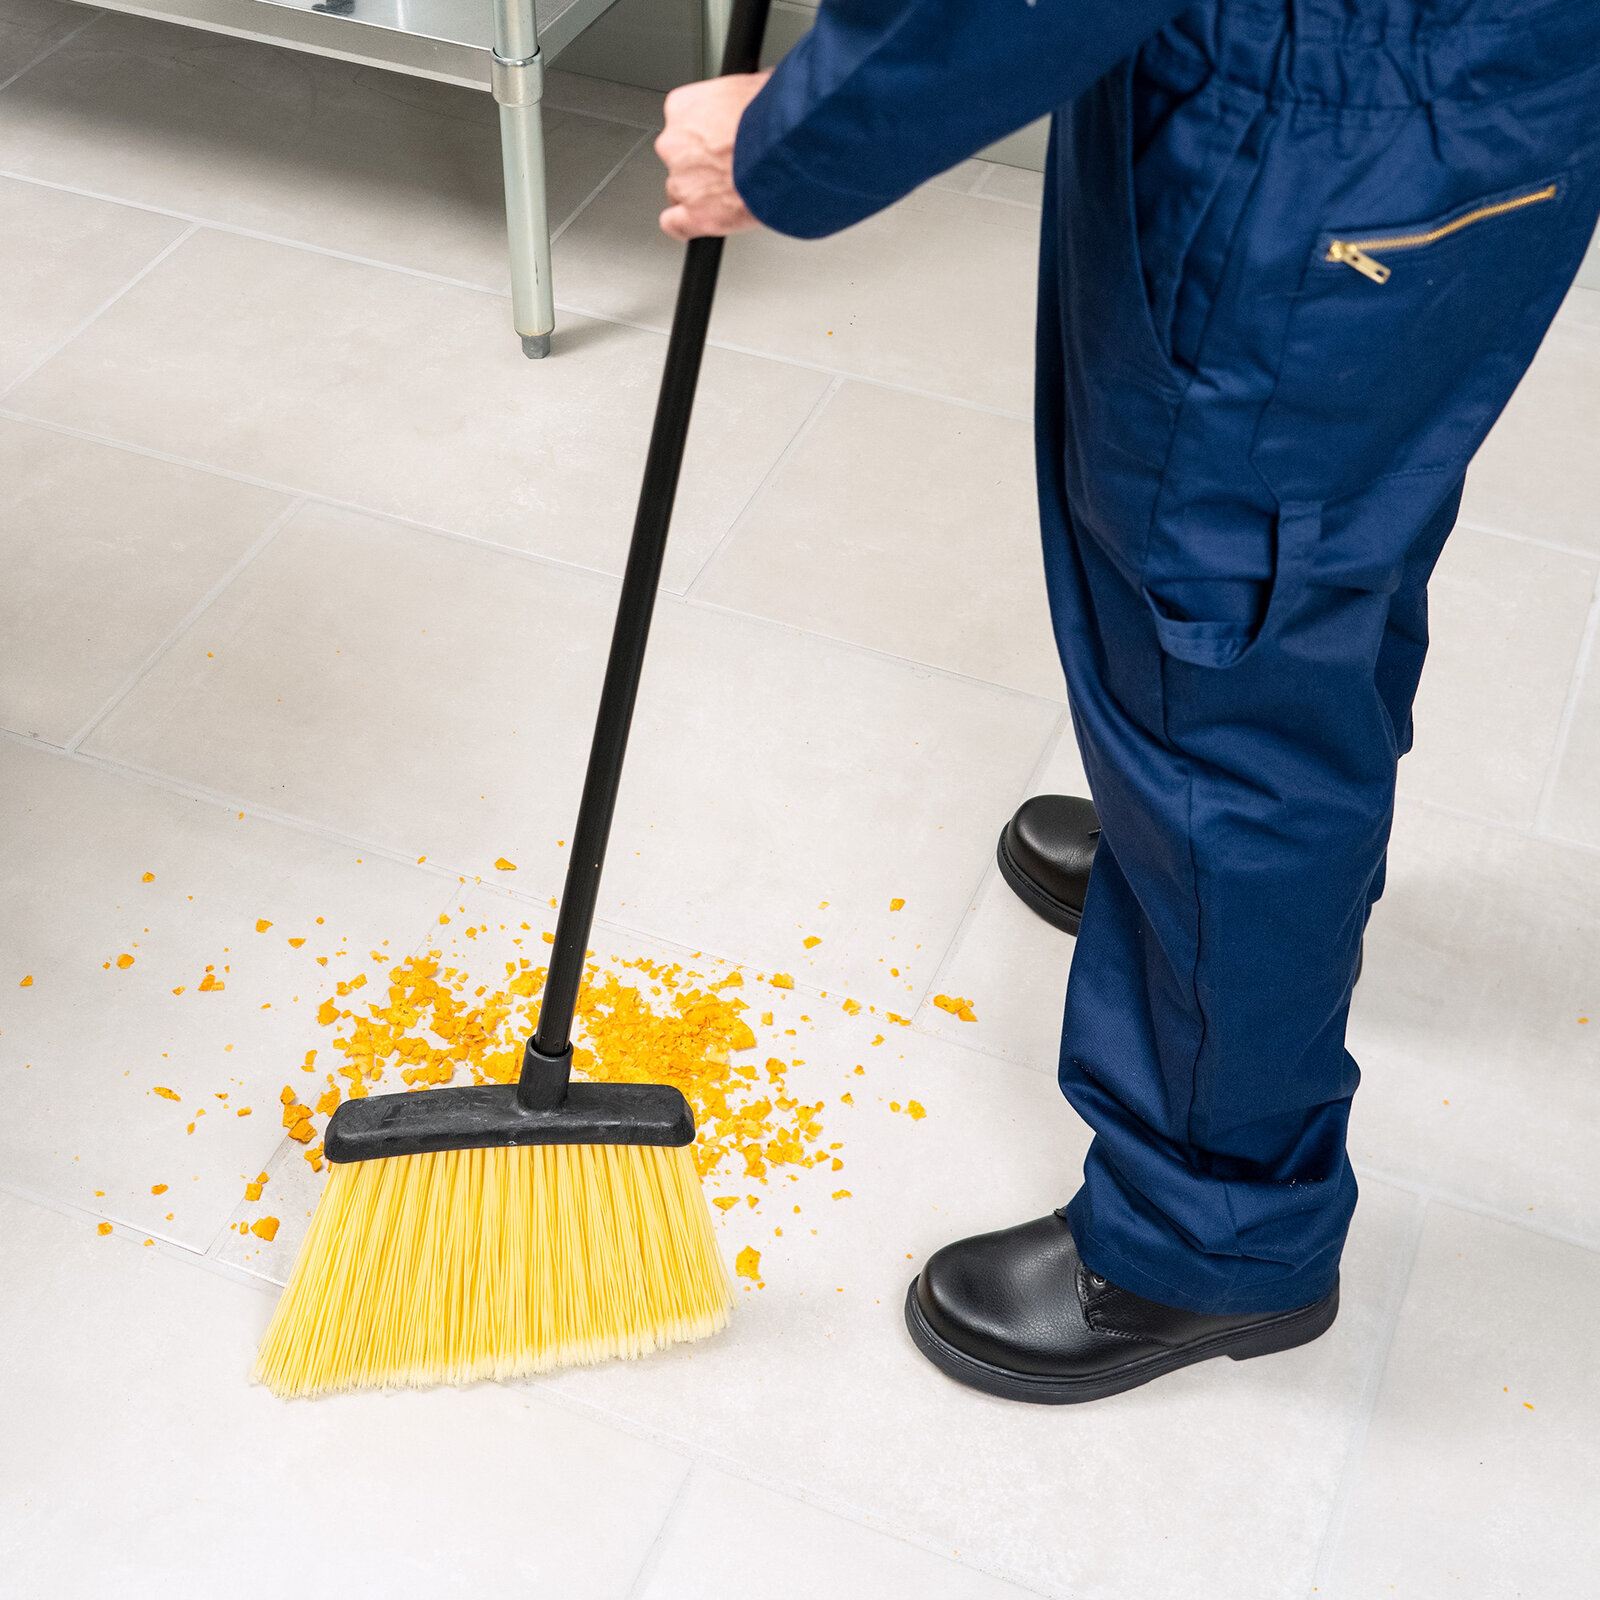 sweep the floor with a broom